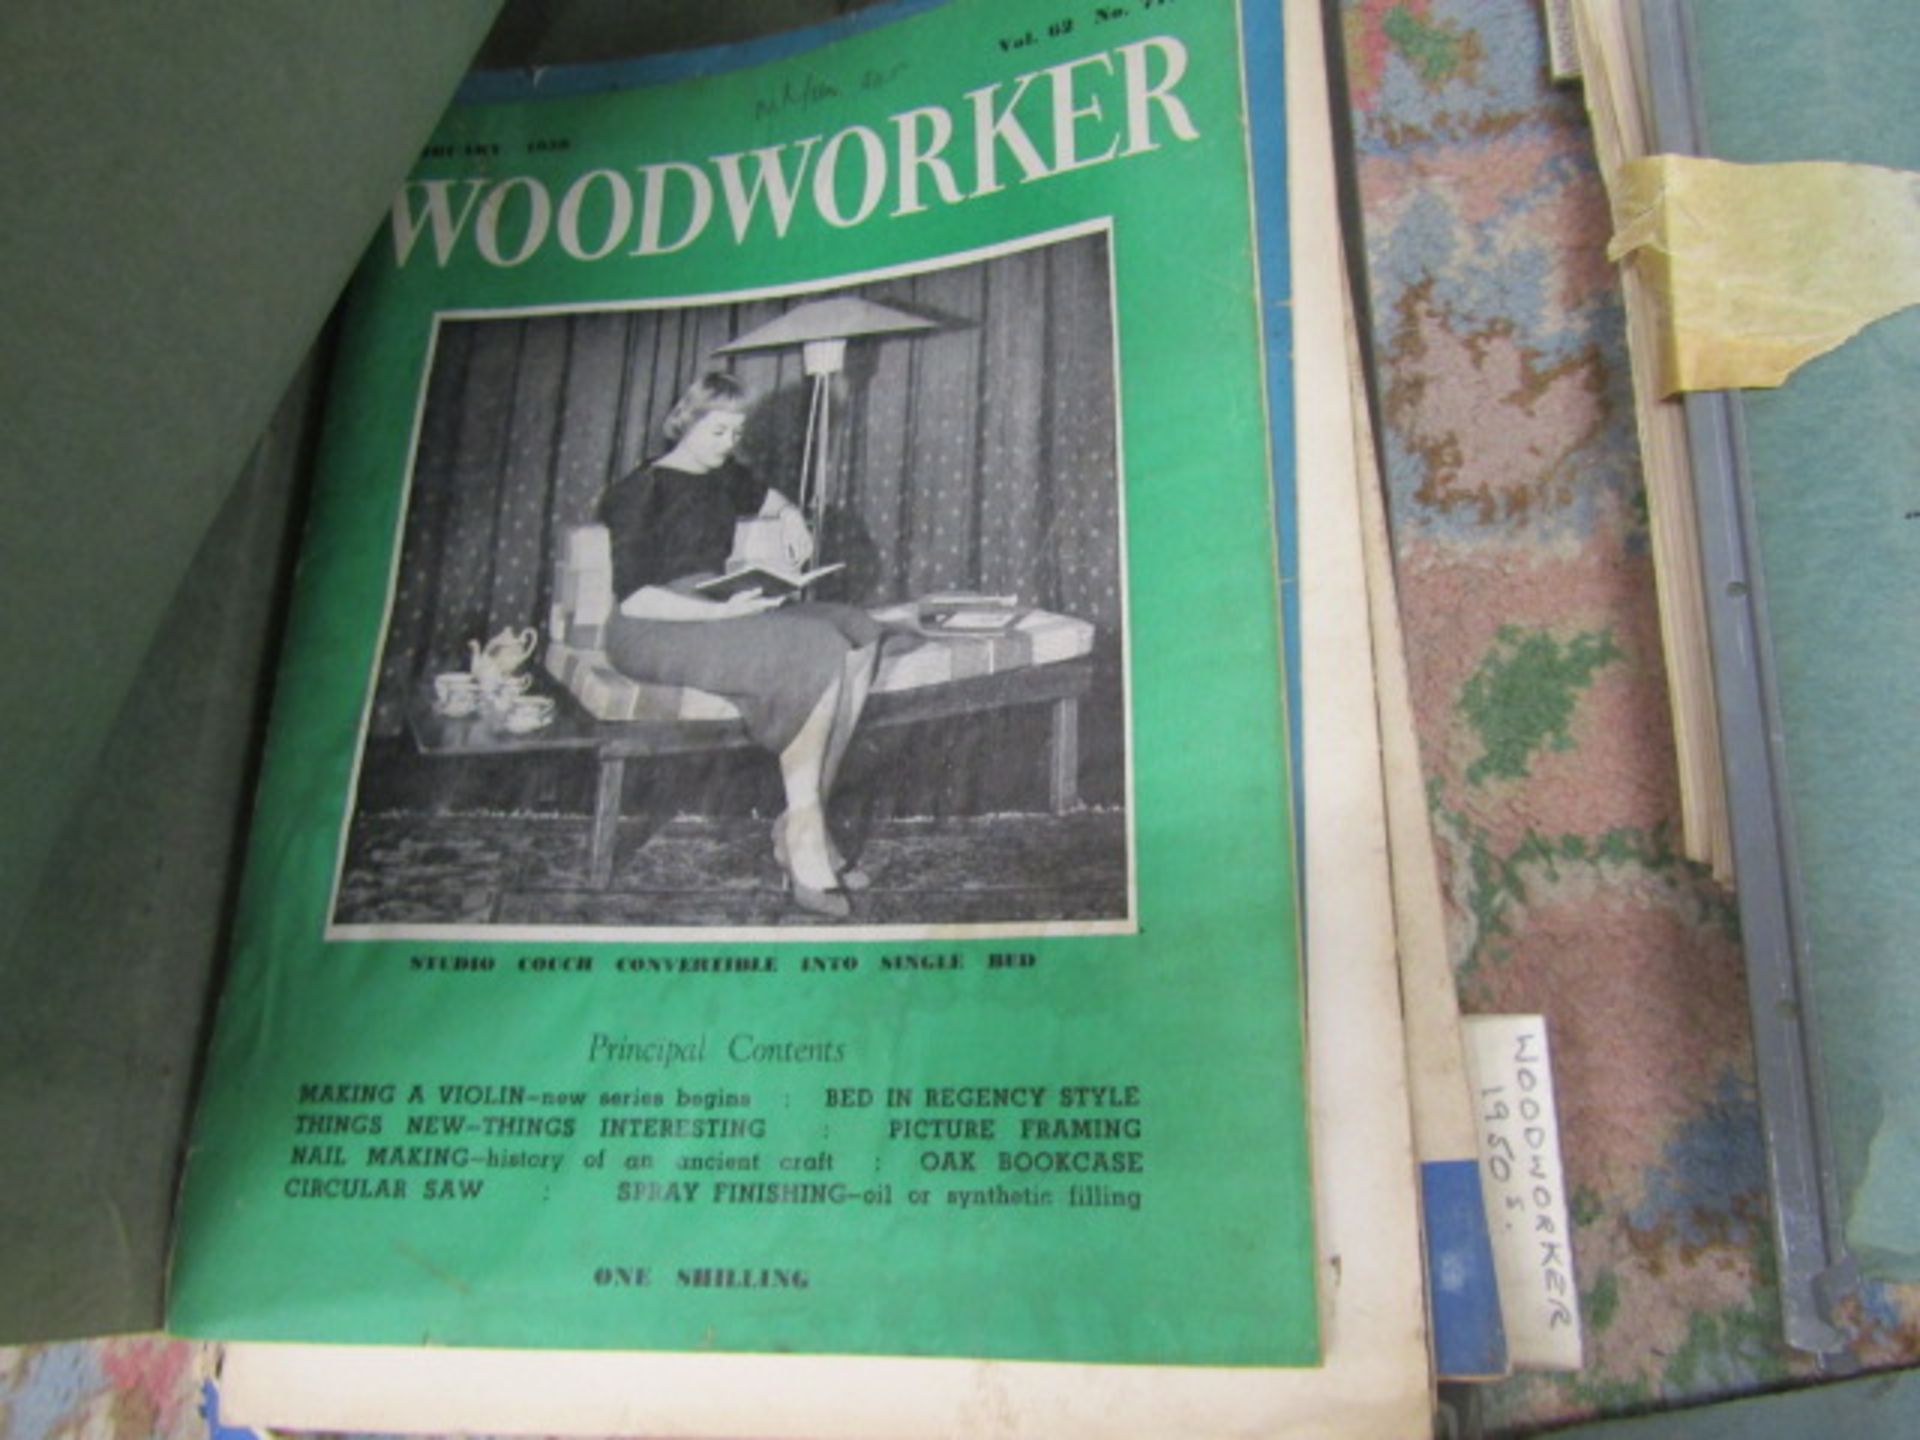 Large amount wood working magazines from 1930's through to 2000 - Image 4 of 13